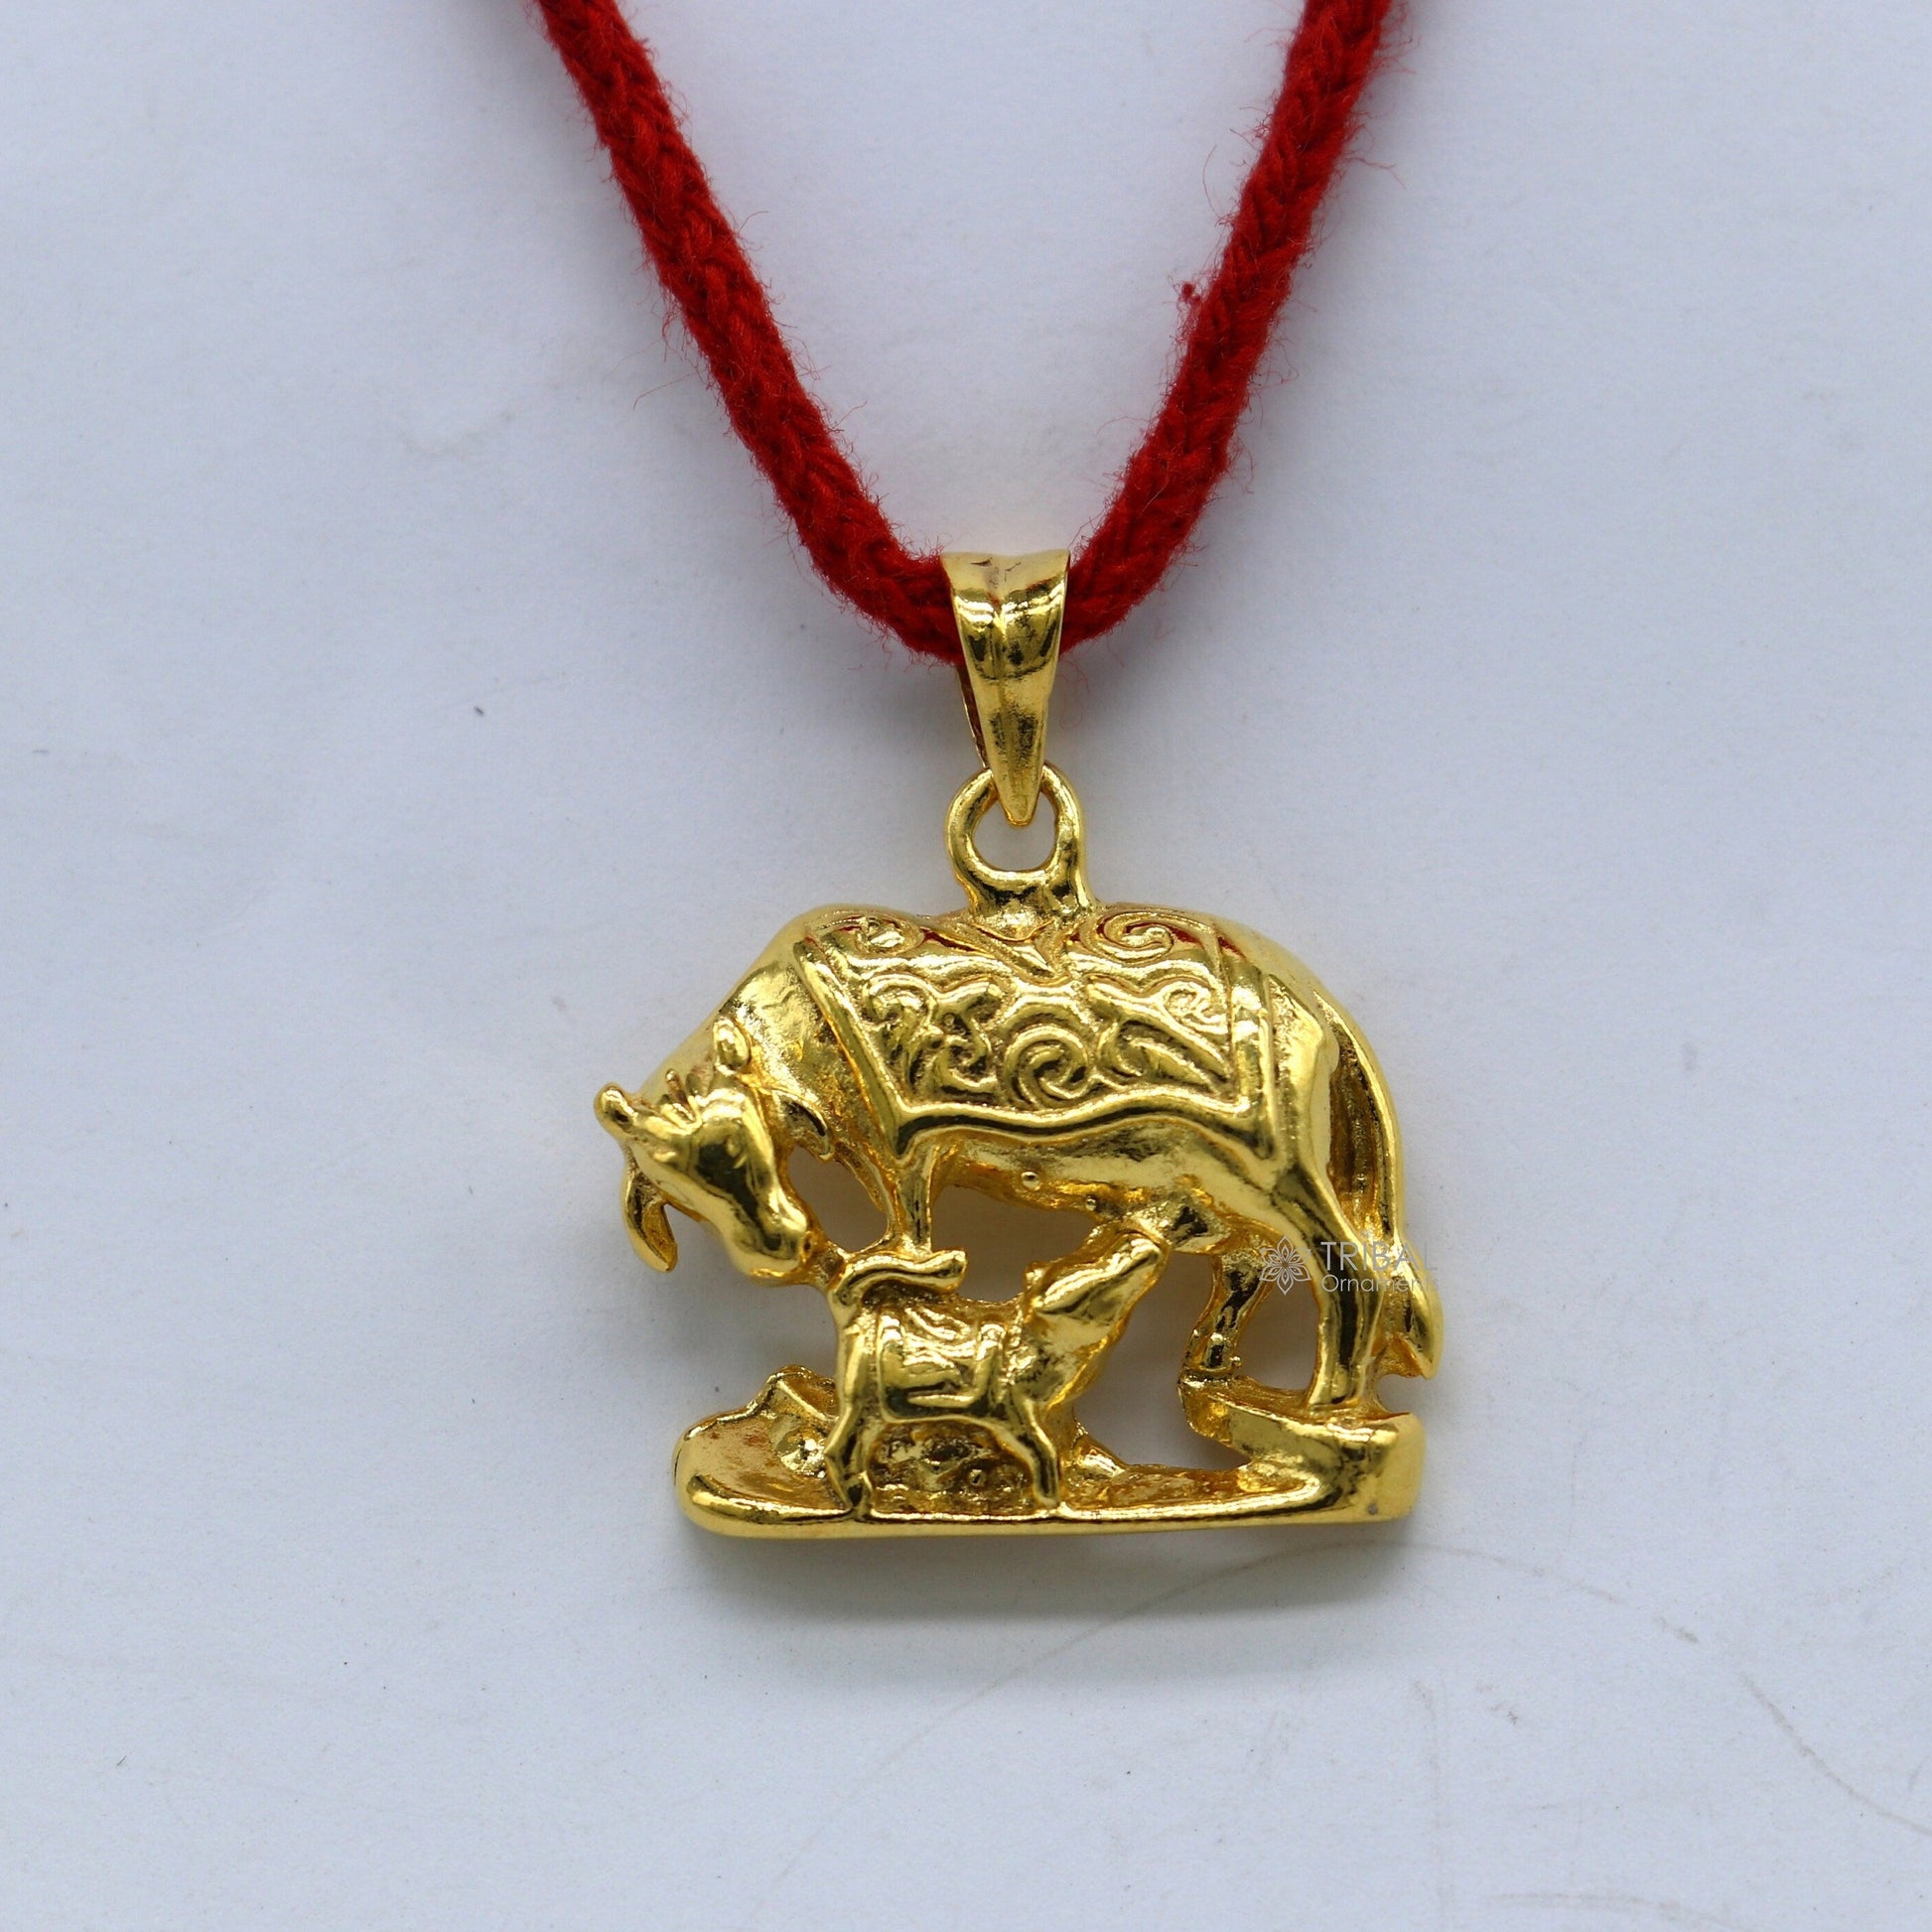 925 sterling silver handmade elegant divine kamdhenu cow with calf pendant, amazing gold polished cow and calf pendant best gift nsp605 - TRIBAL ORNAMENTS